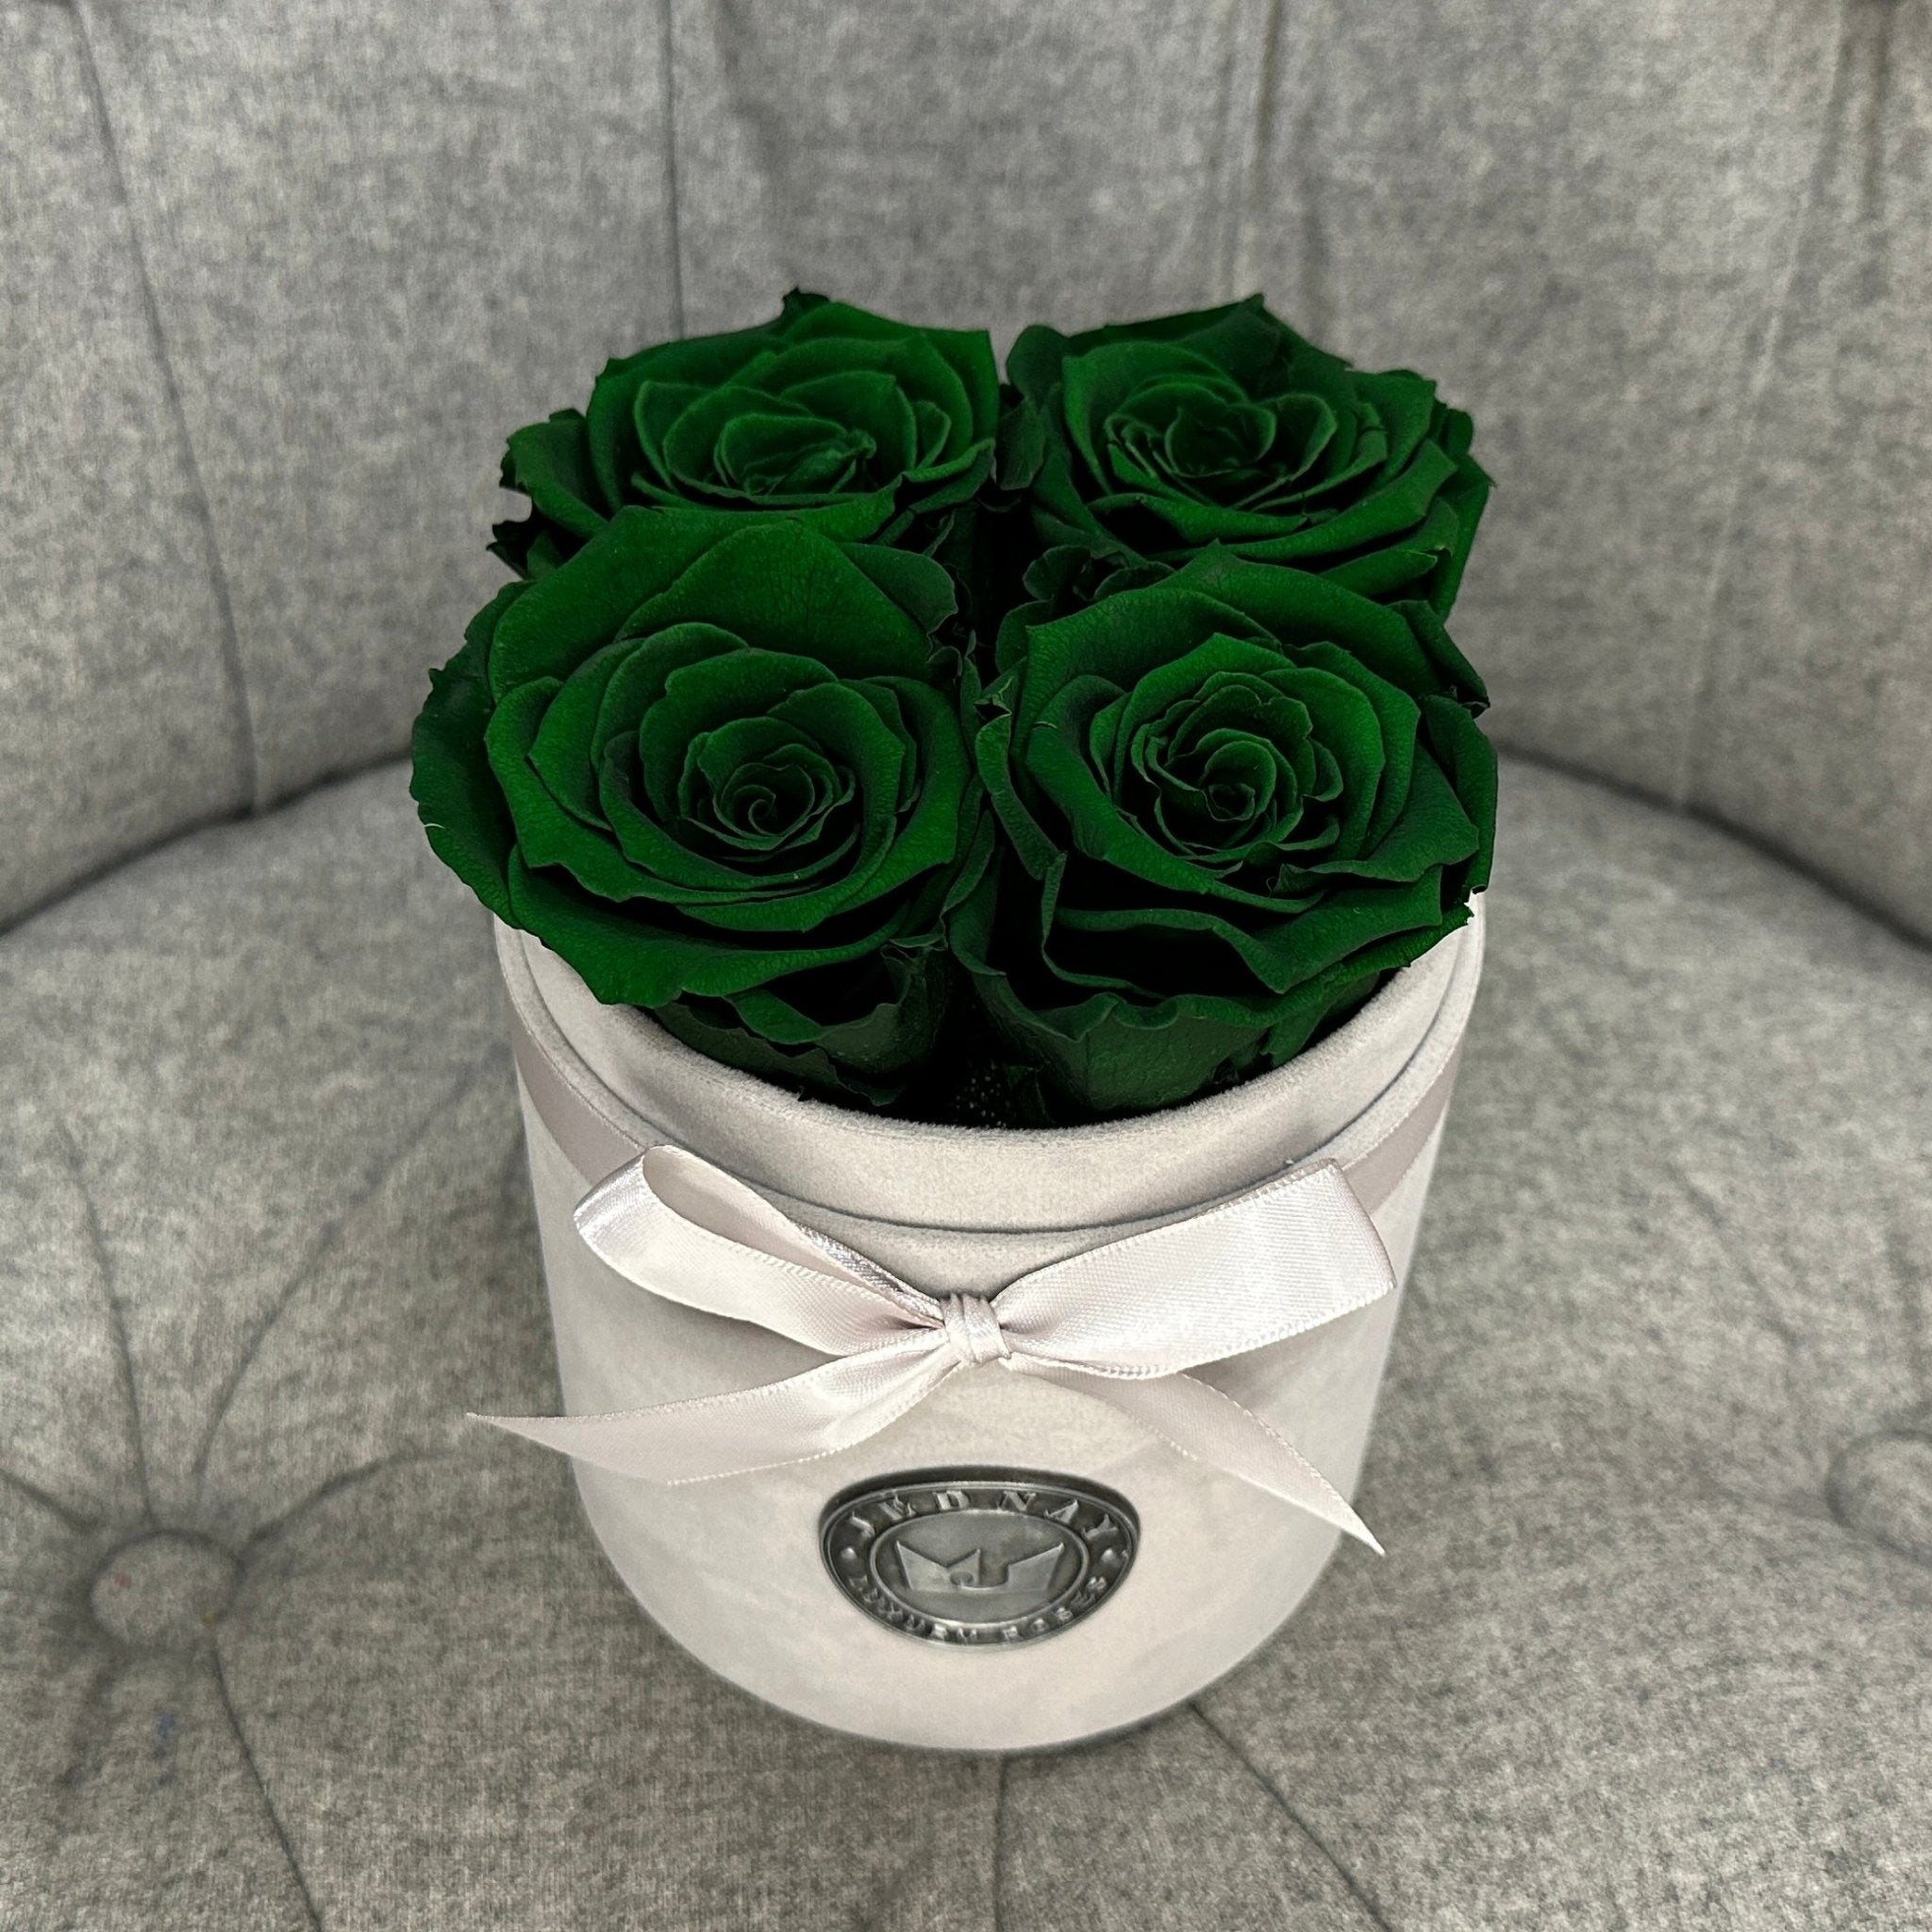 Petite Grey Suede Forever Rose Box - Deep Forest Green Eternal Roses - Jednay Roses